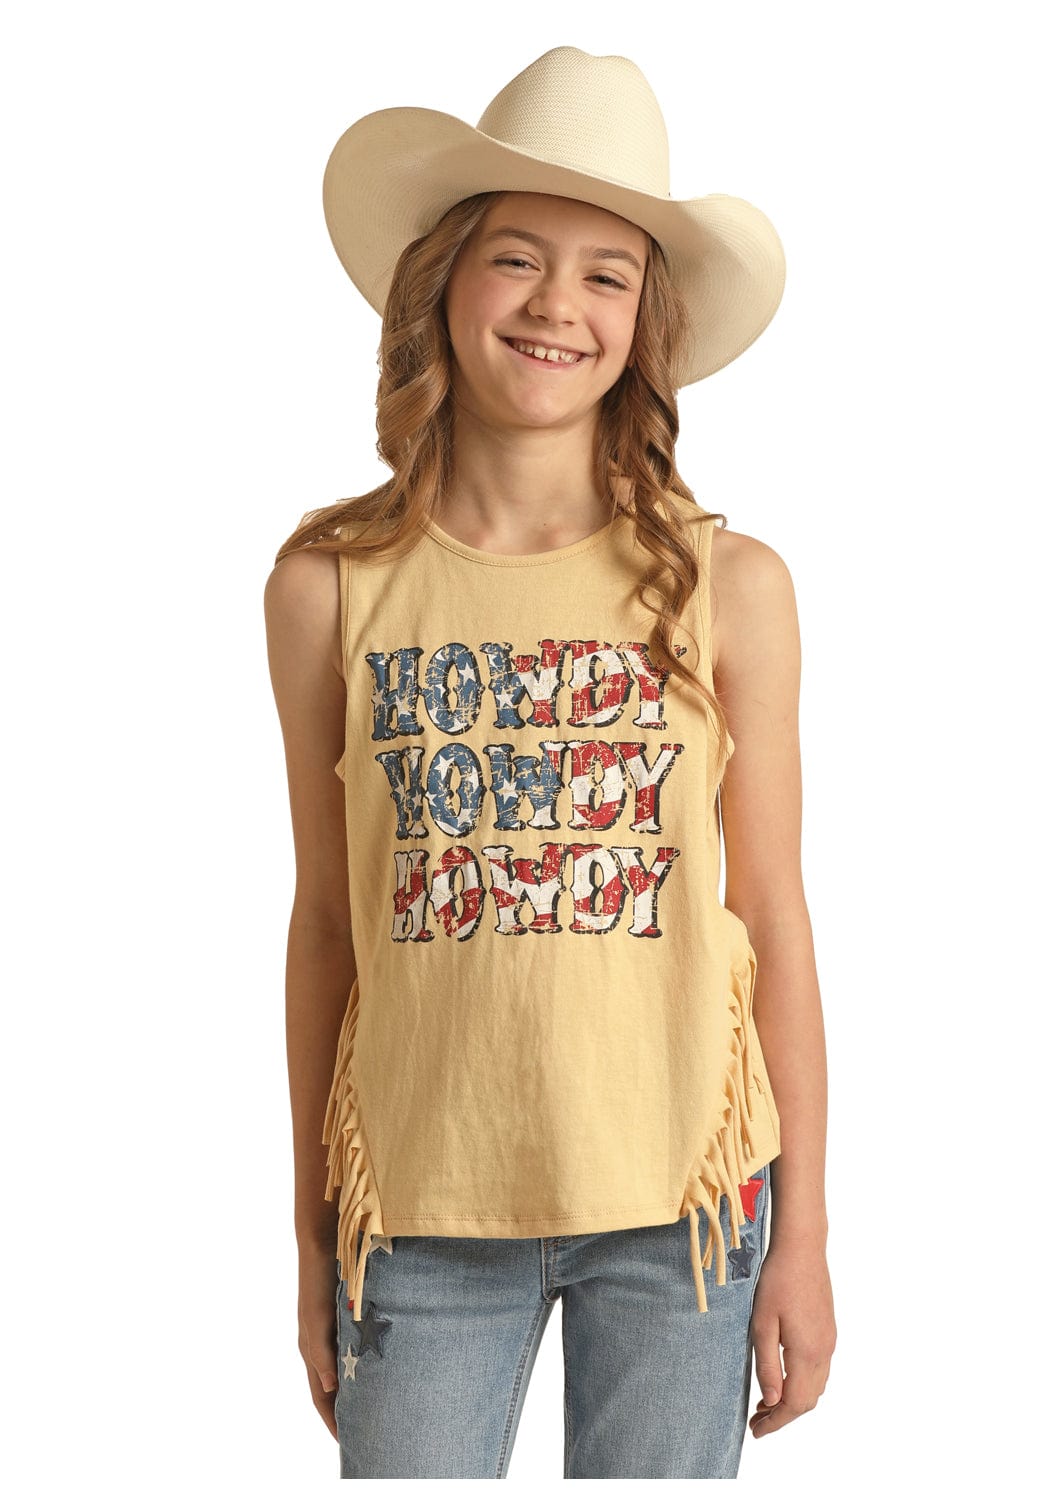 PANHANDLE SLIM Shirts Rock & Roll Cowgirl Girls Howdy Fringed Yellow Tank Top RRGT20R110